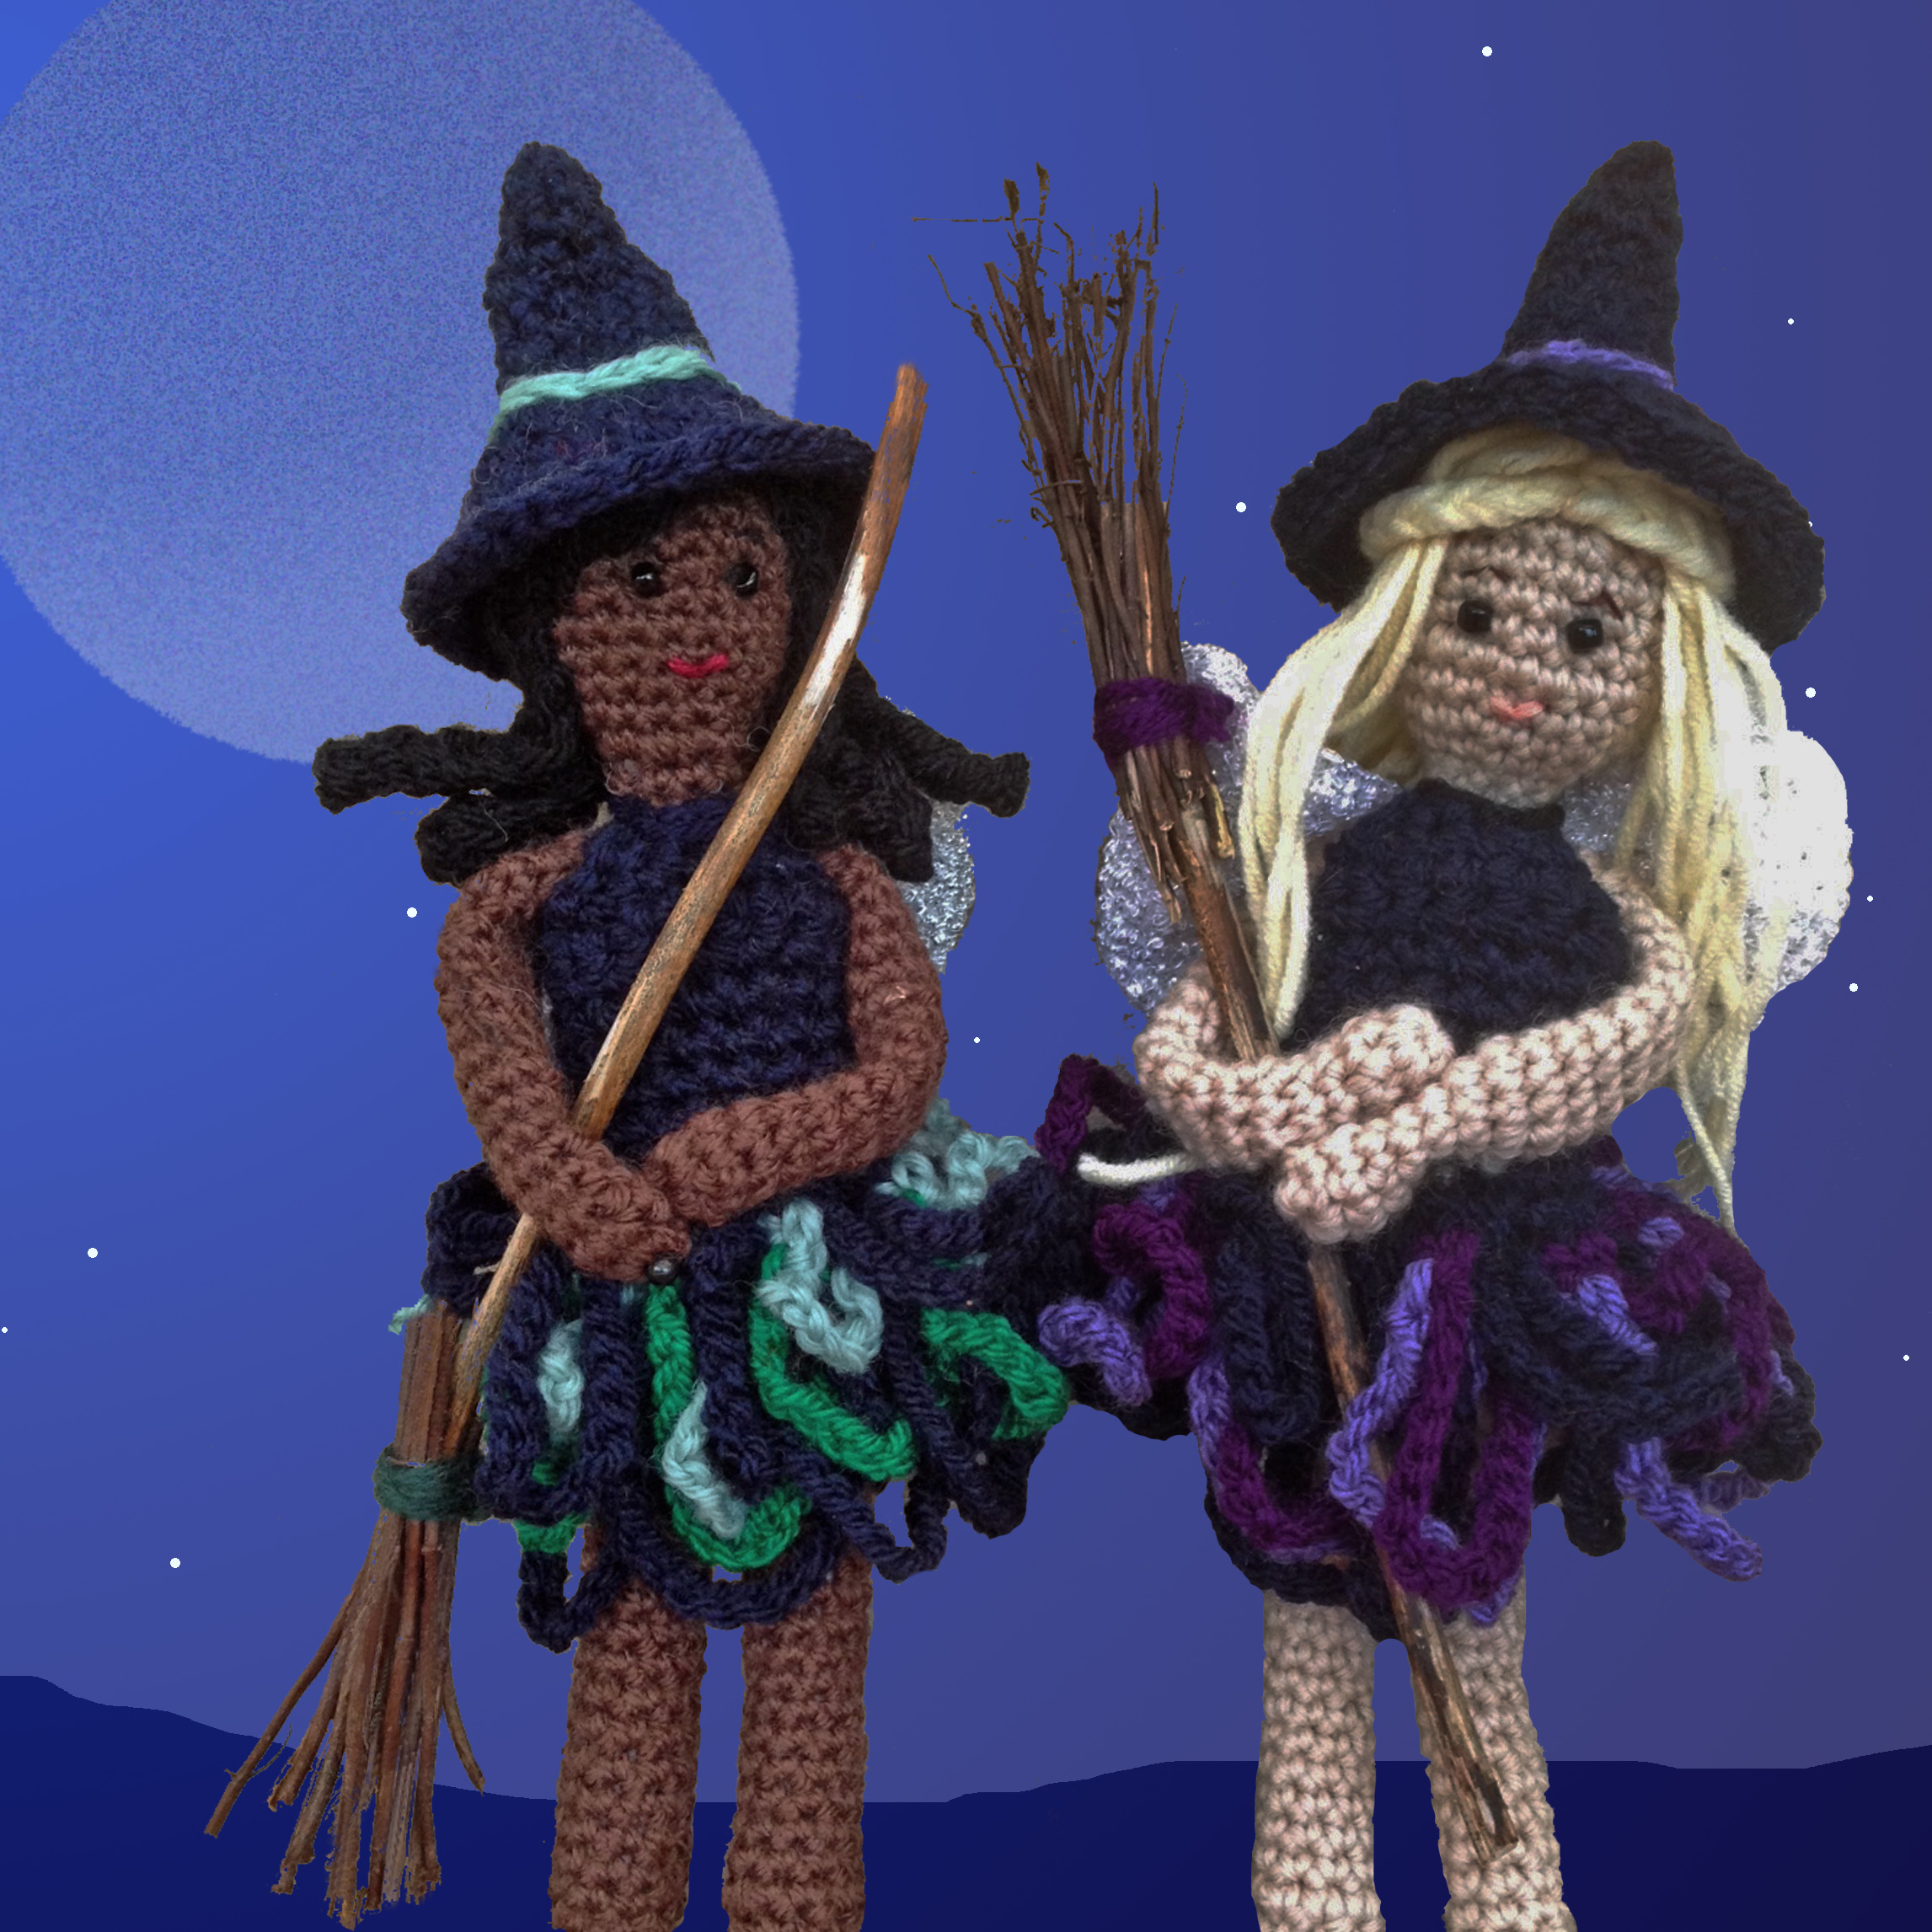 Holly & Snowflake swap their winter dresses for Halloween Costumes